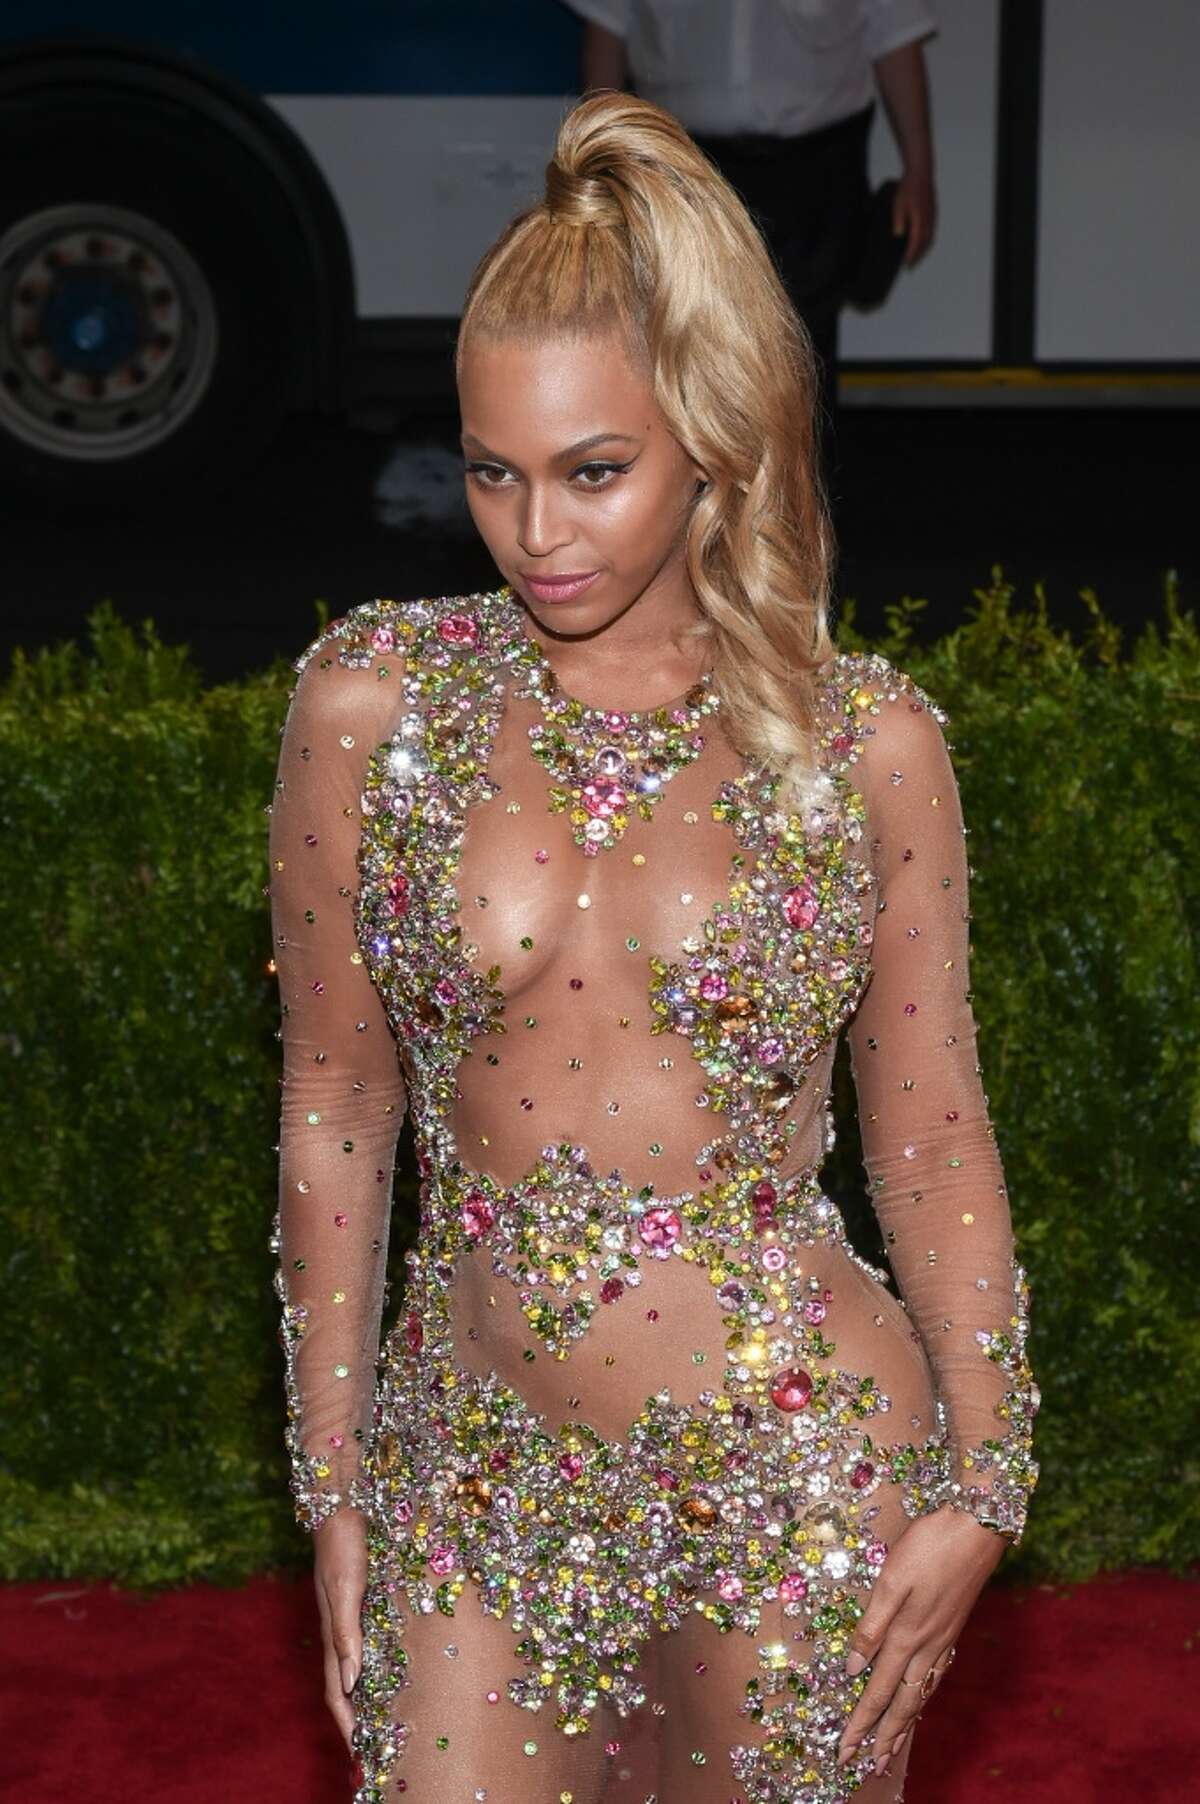 NEW YORK, NY - MAY 11: Beyonce attends the "China: Through The Looking Glass" Costume Institute Benefit Gala at the Metropolitan Museum of Art on May 4, 2015 in New York City. (Photo by Andrew H. Walker/Getty Images for Variety)